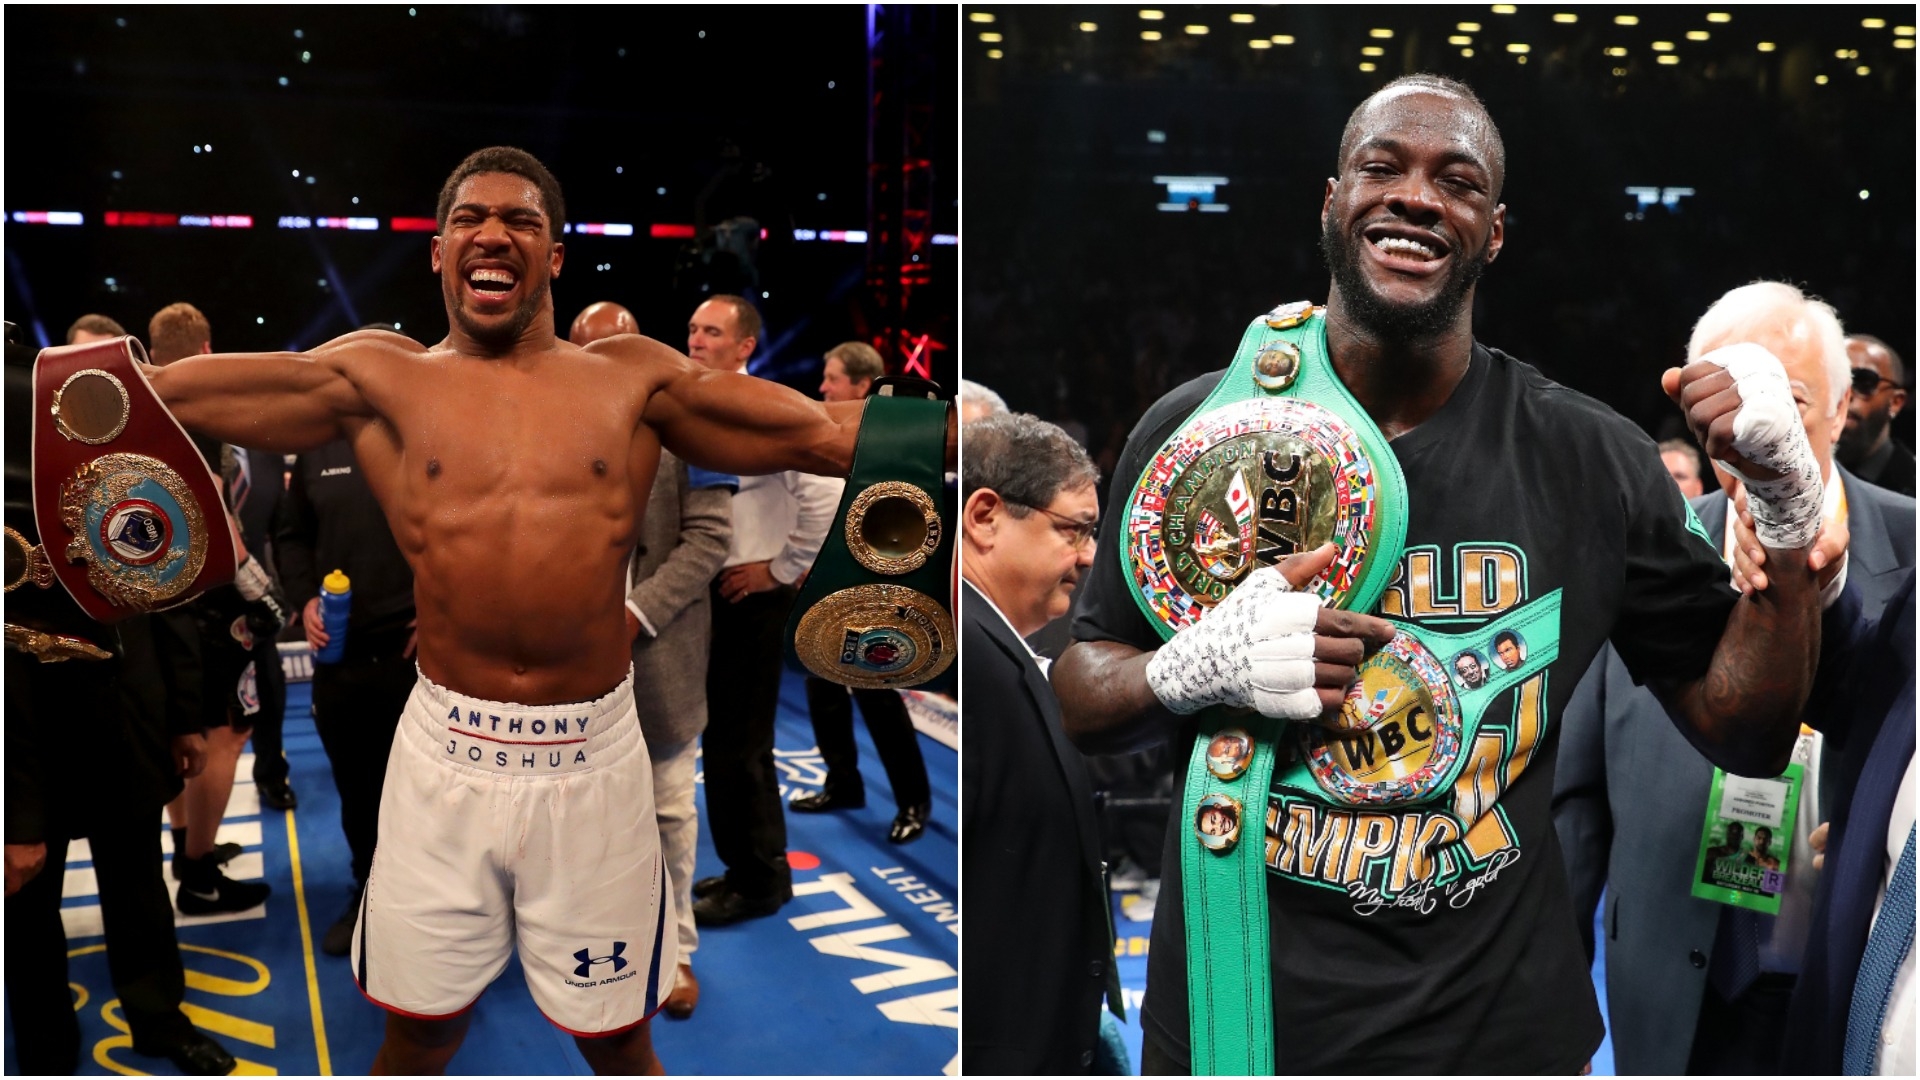 Anthony Joshua-Deontay Wilder must be next, says promoter Eddie Hearn - The Ring1920 x 1080